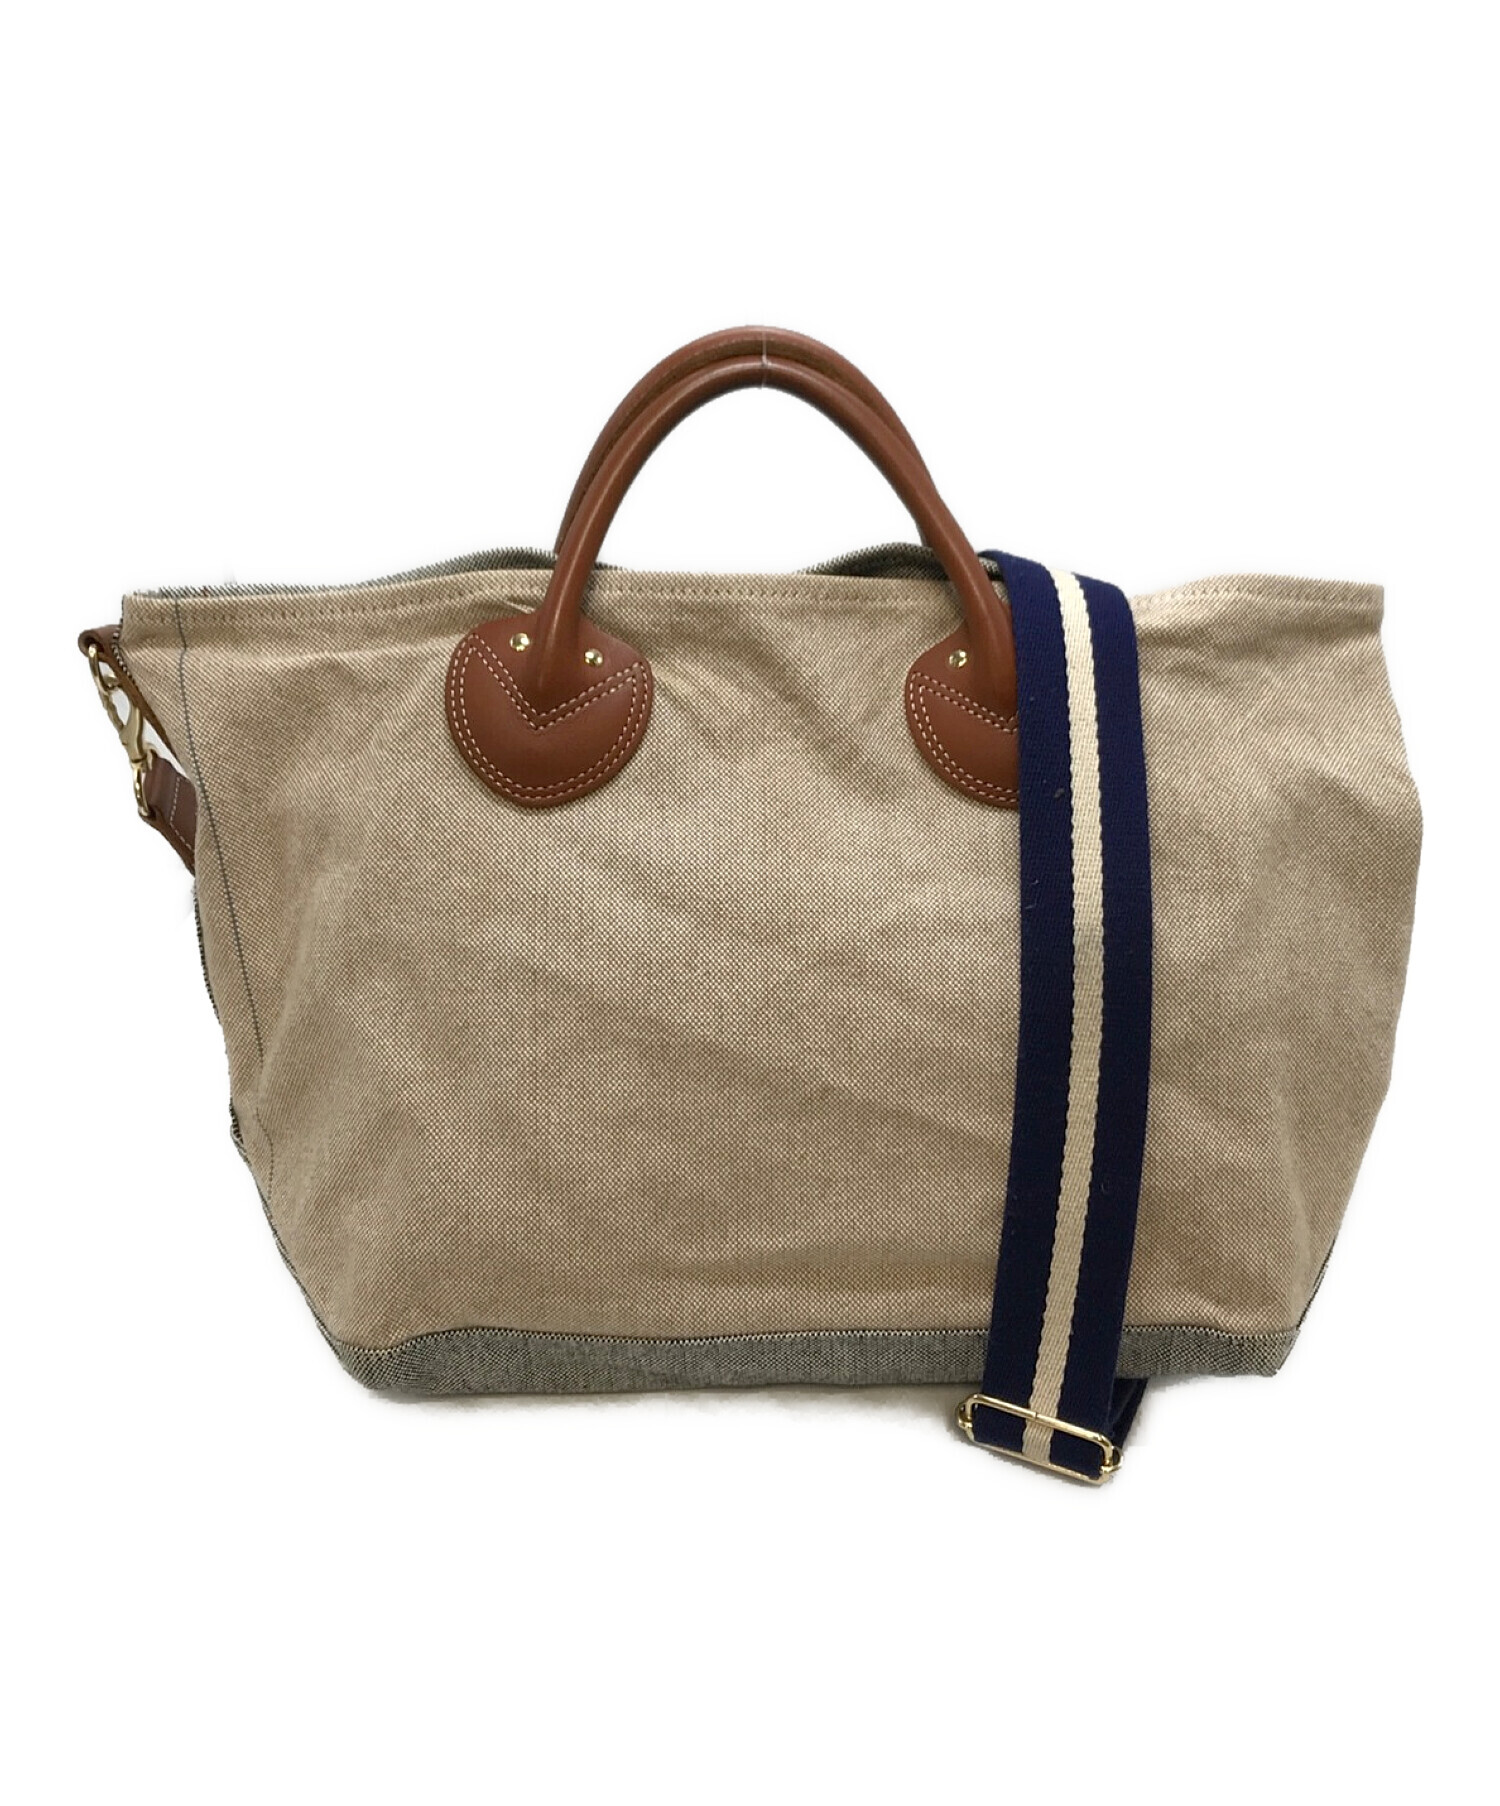 YOUNG & OLSEN The DRYGOODS STORE (ヤングアンドオルセン ザ ドライグッズストア) ASH CANVAS  SHOULDER TOTE S ベージュ×グレー